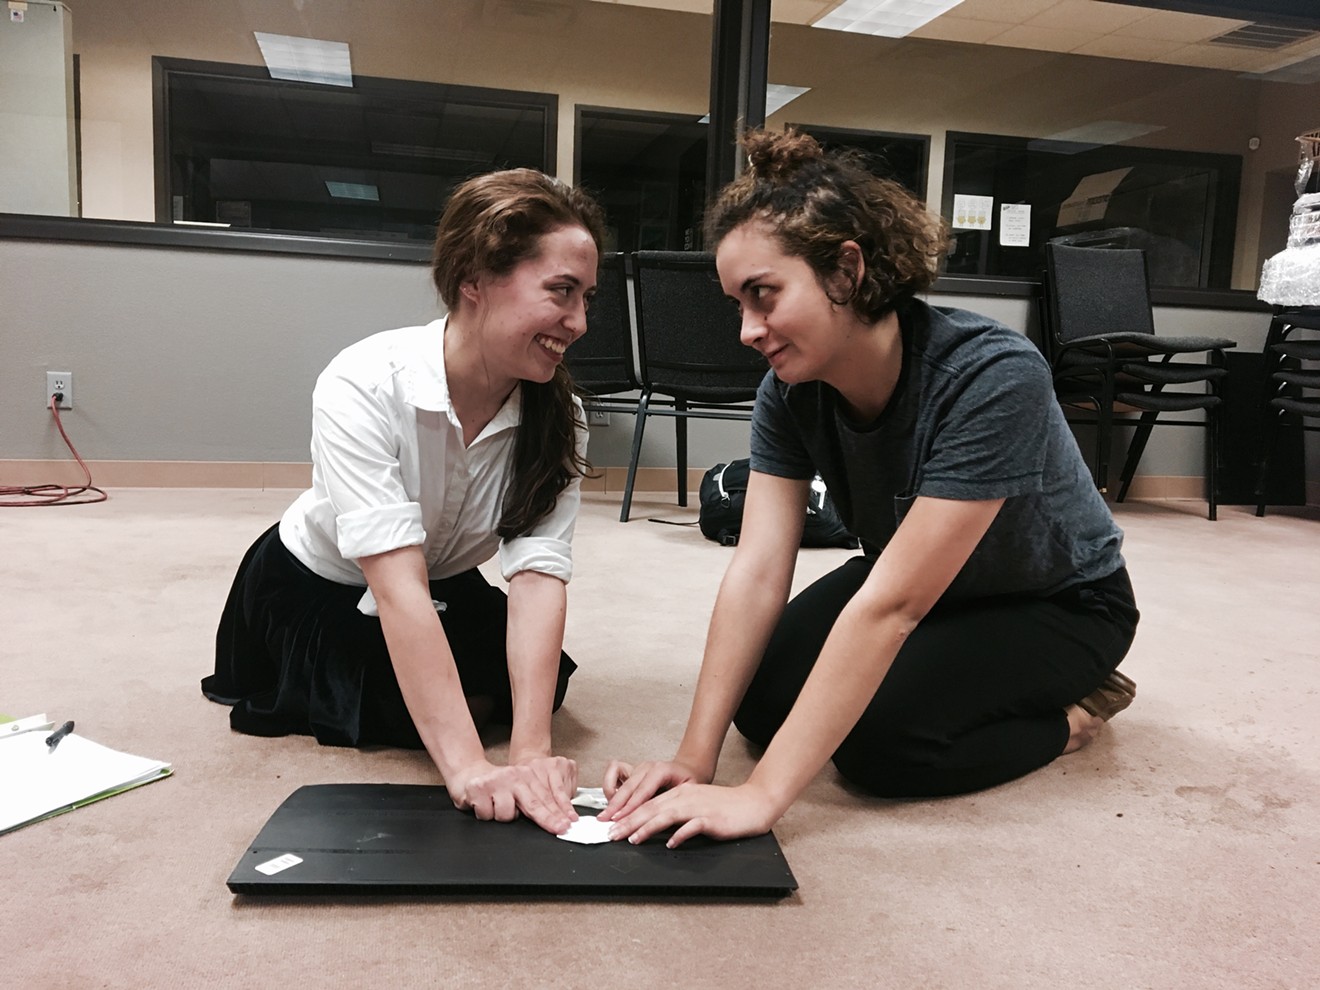 The teenage protagonist, Arrah, and her best friend, Rachel, embody the “romance” of the play.